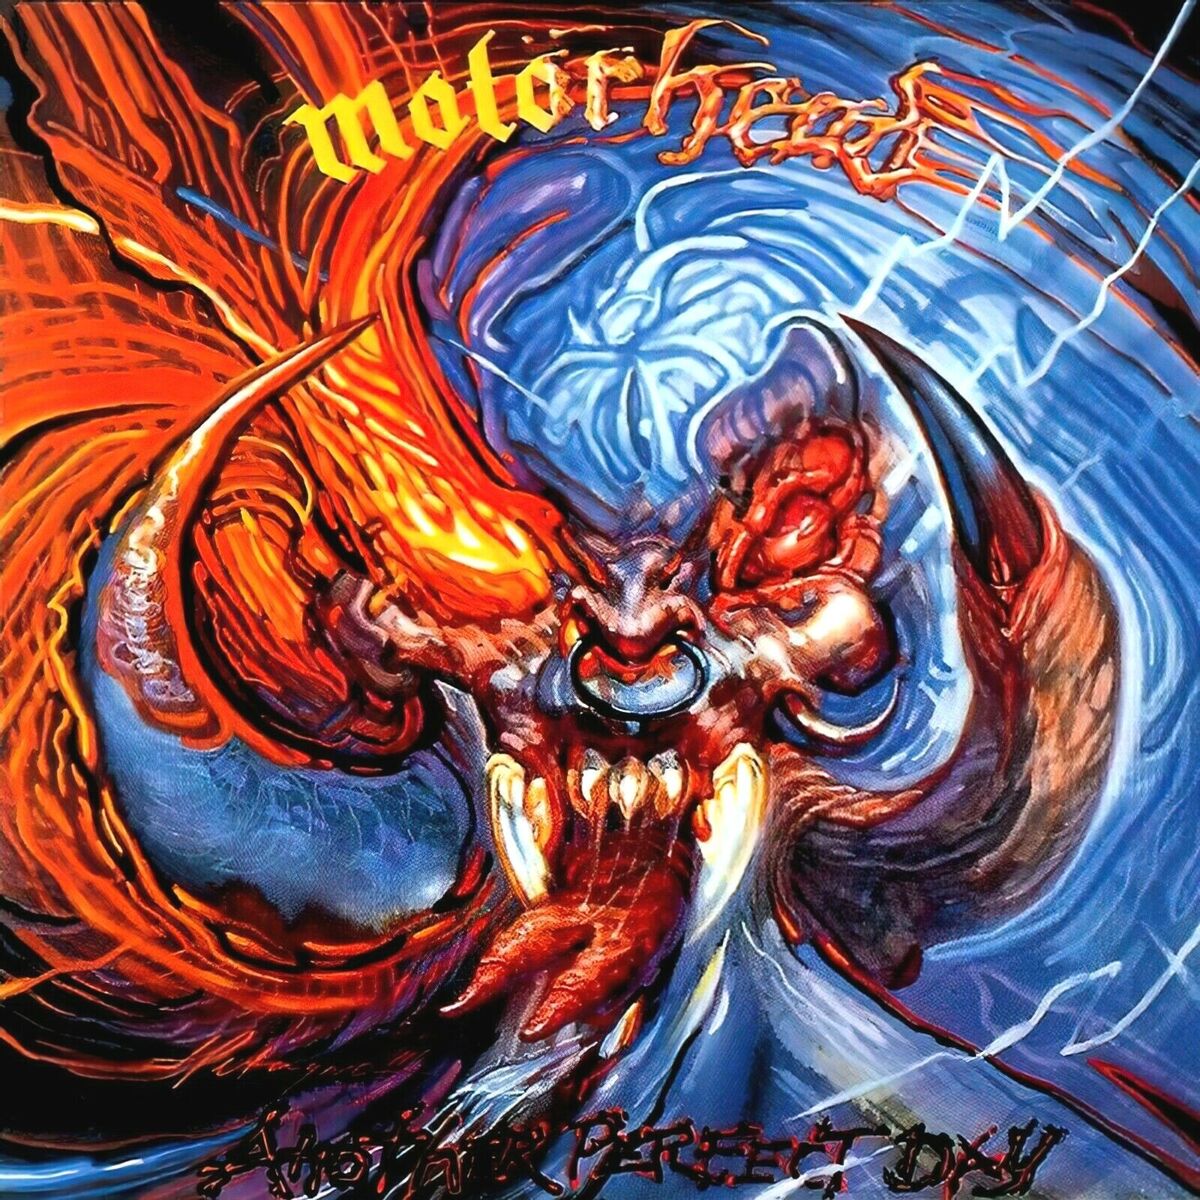 Металл BMG Motorhead - Another Perfect Day (Half Speed) (Coloured Vinyl LP) 20 pack of pool skimmer socks perfect savers